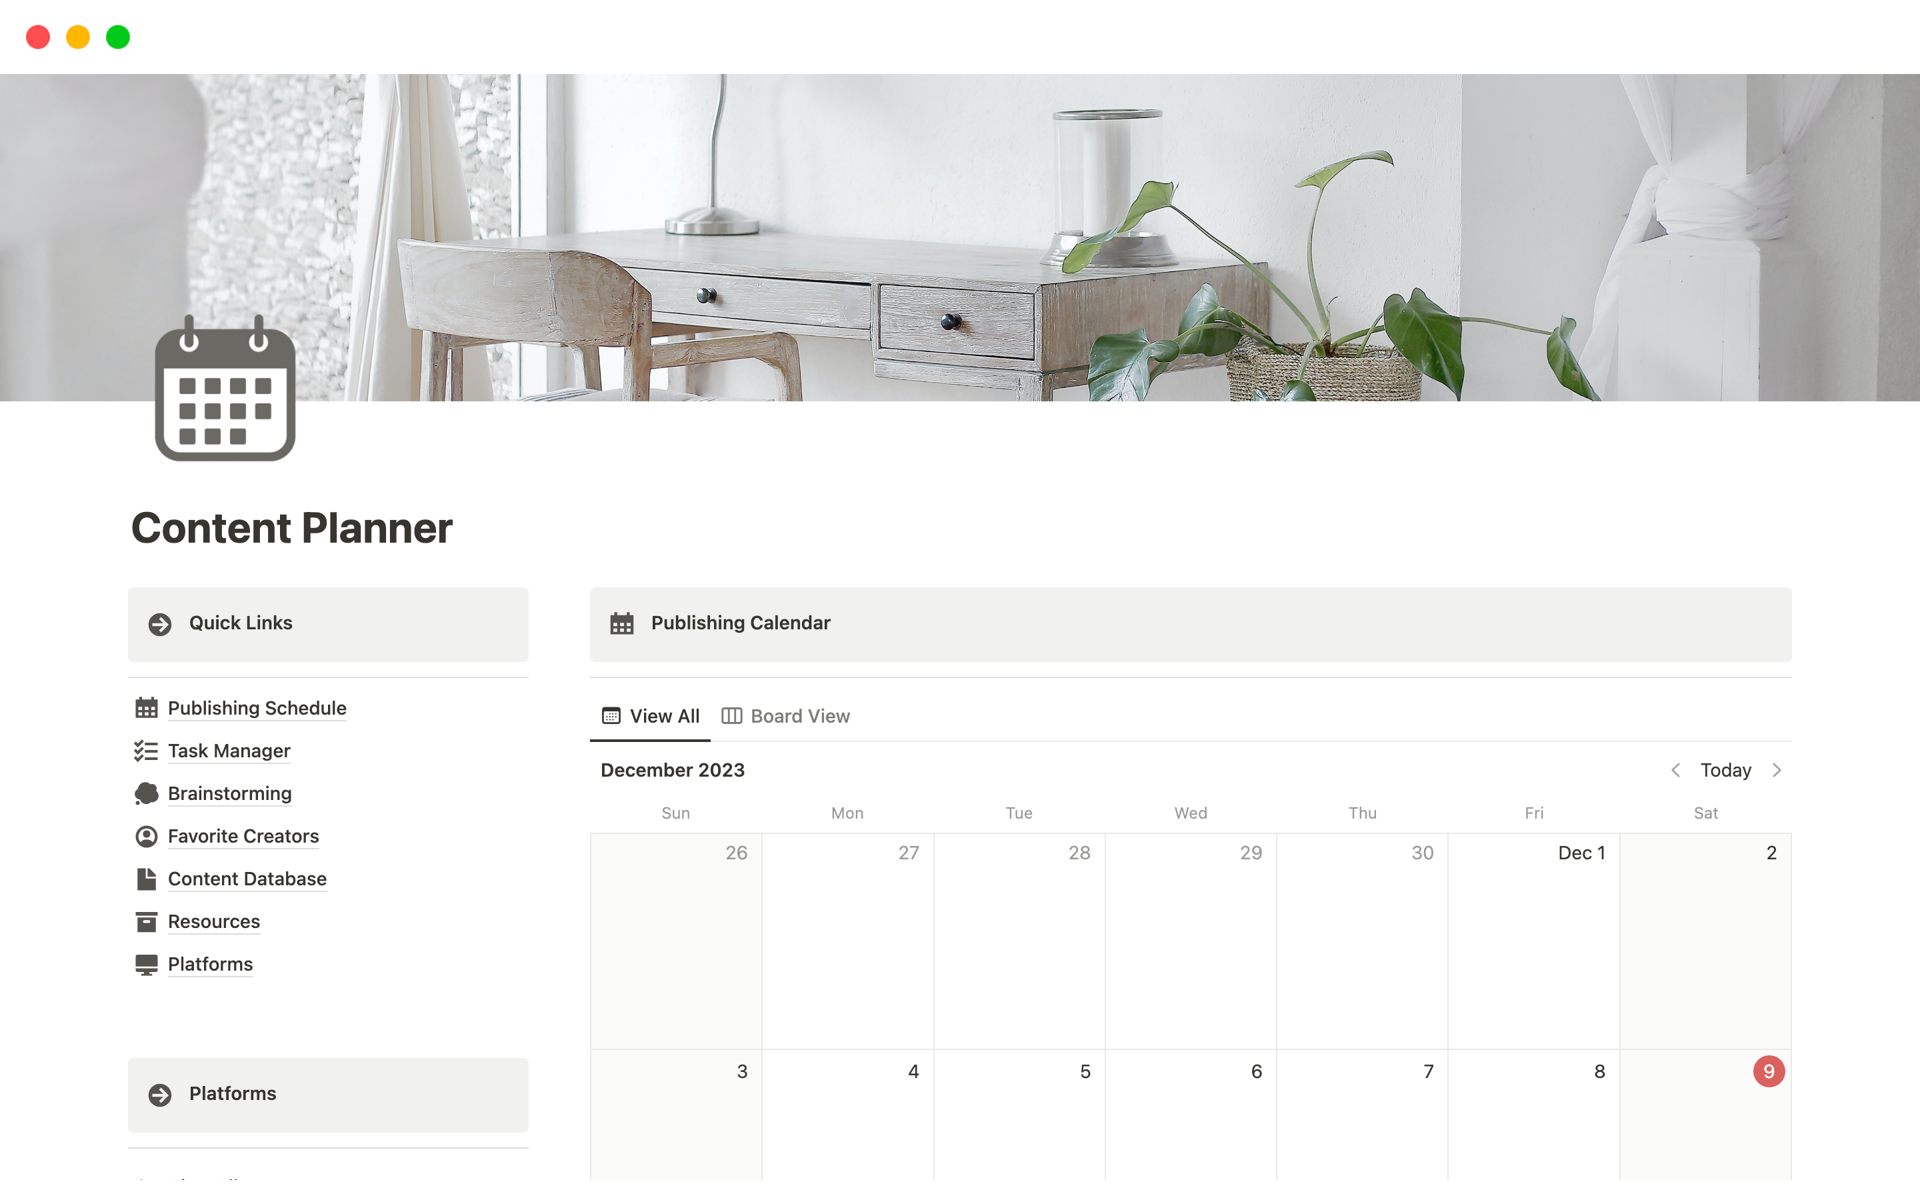 This template is helpful for all content creators looking for a central place to store their publishing schedule and manage diverse platforms. 